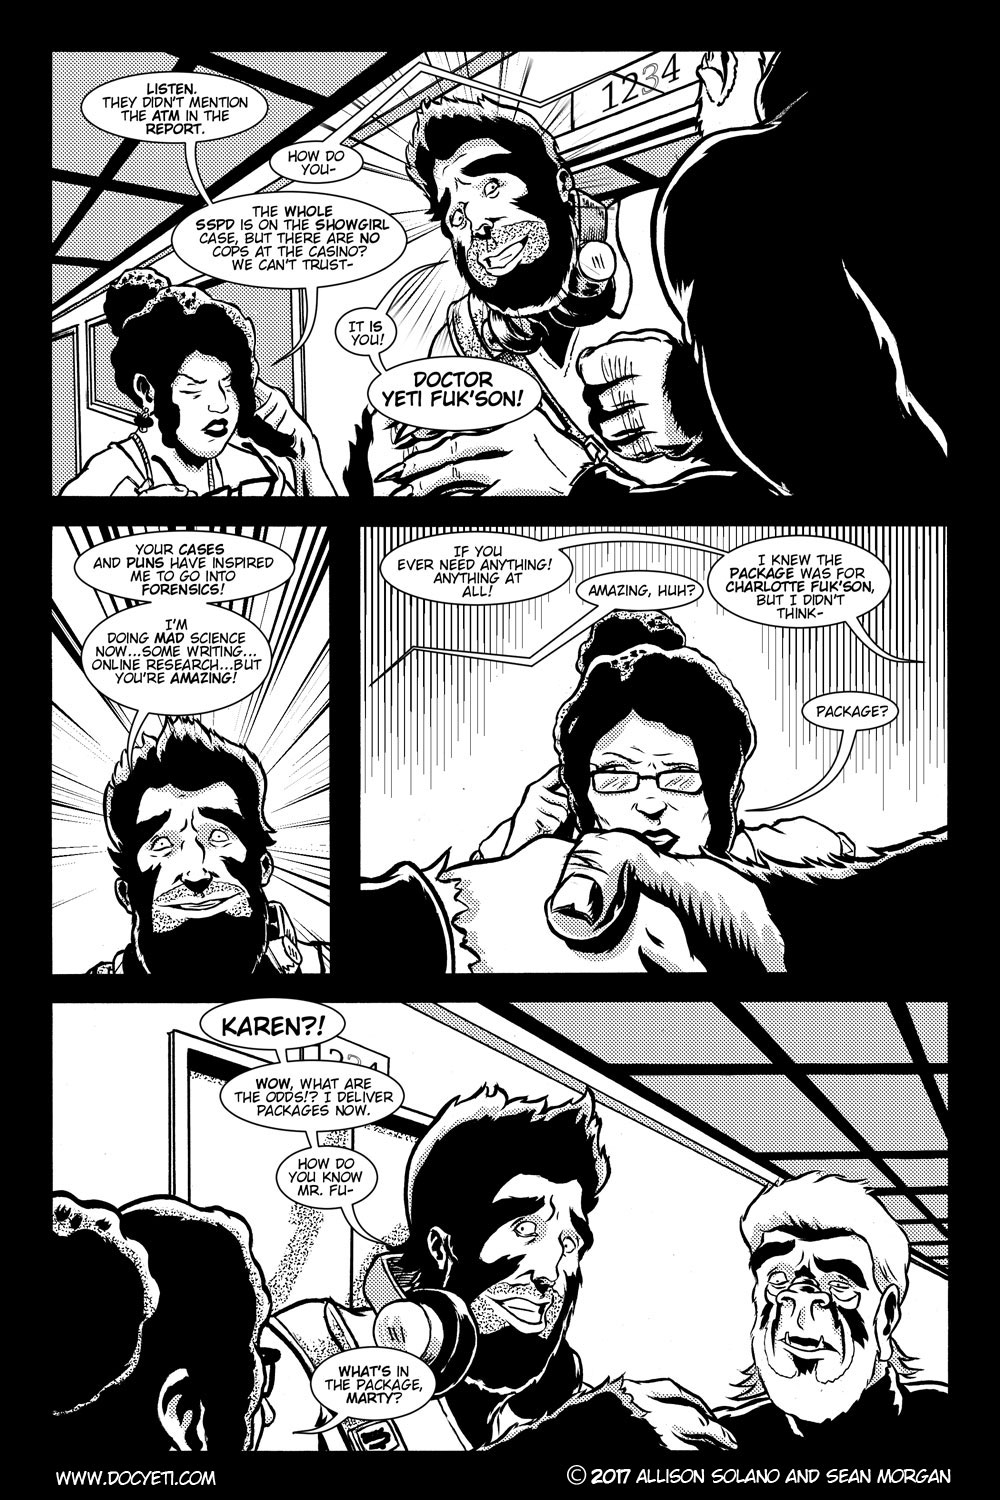 This Yeti for Hire! or the Yeti with the Lace Kerchief! Issue 3 pg.05